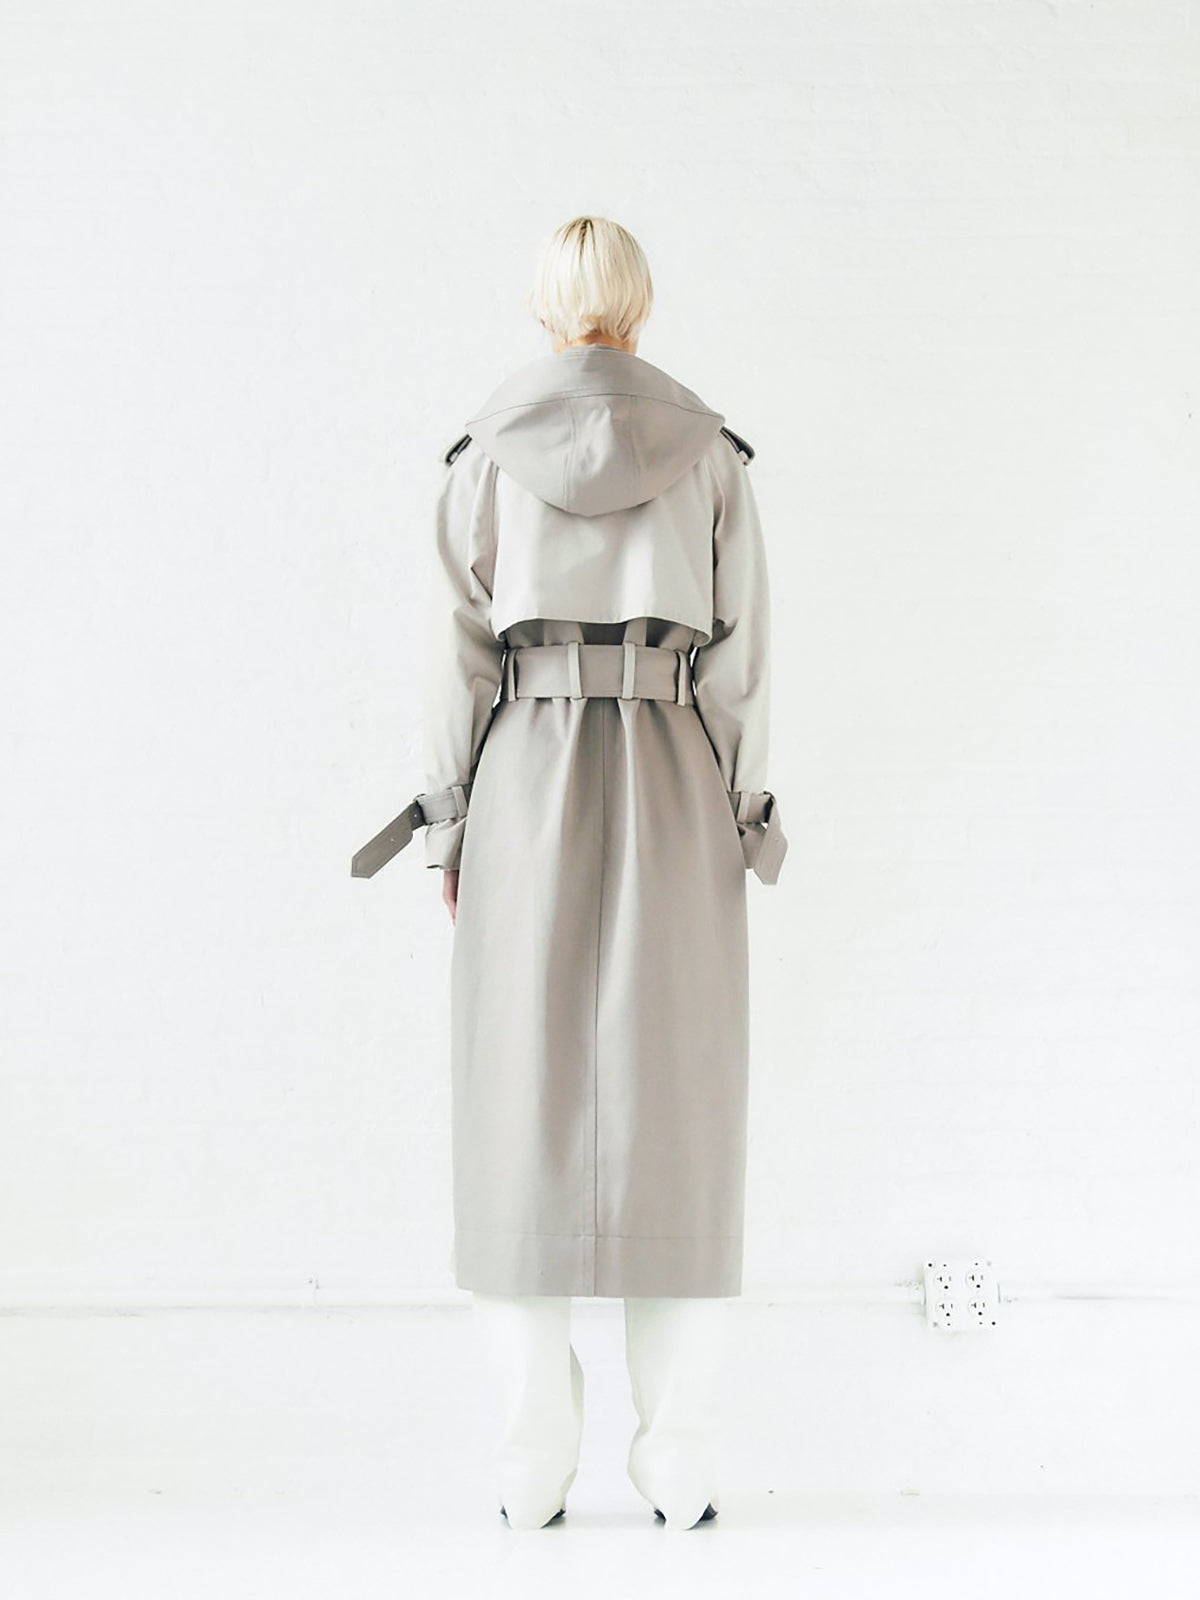 Water Grey Resistant Sustainable | Light | Trench Fashionkind Coat